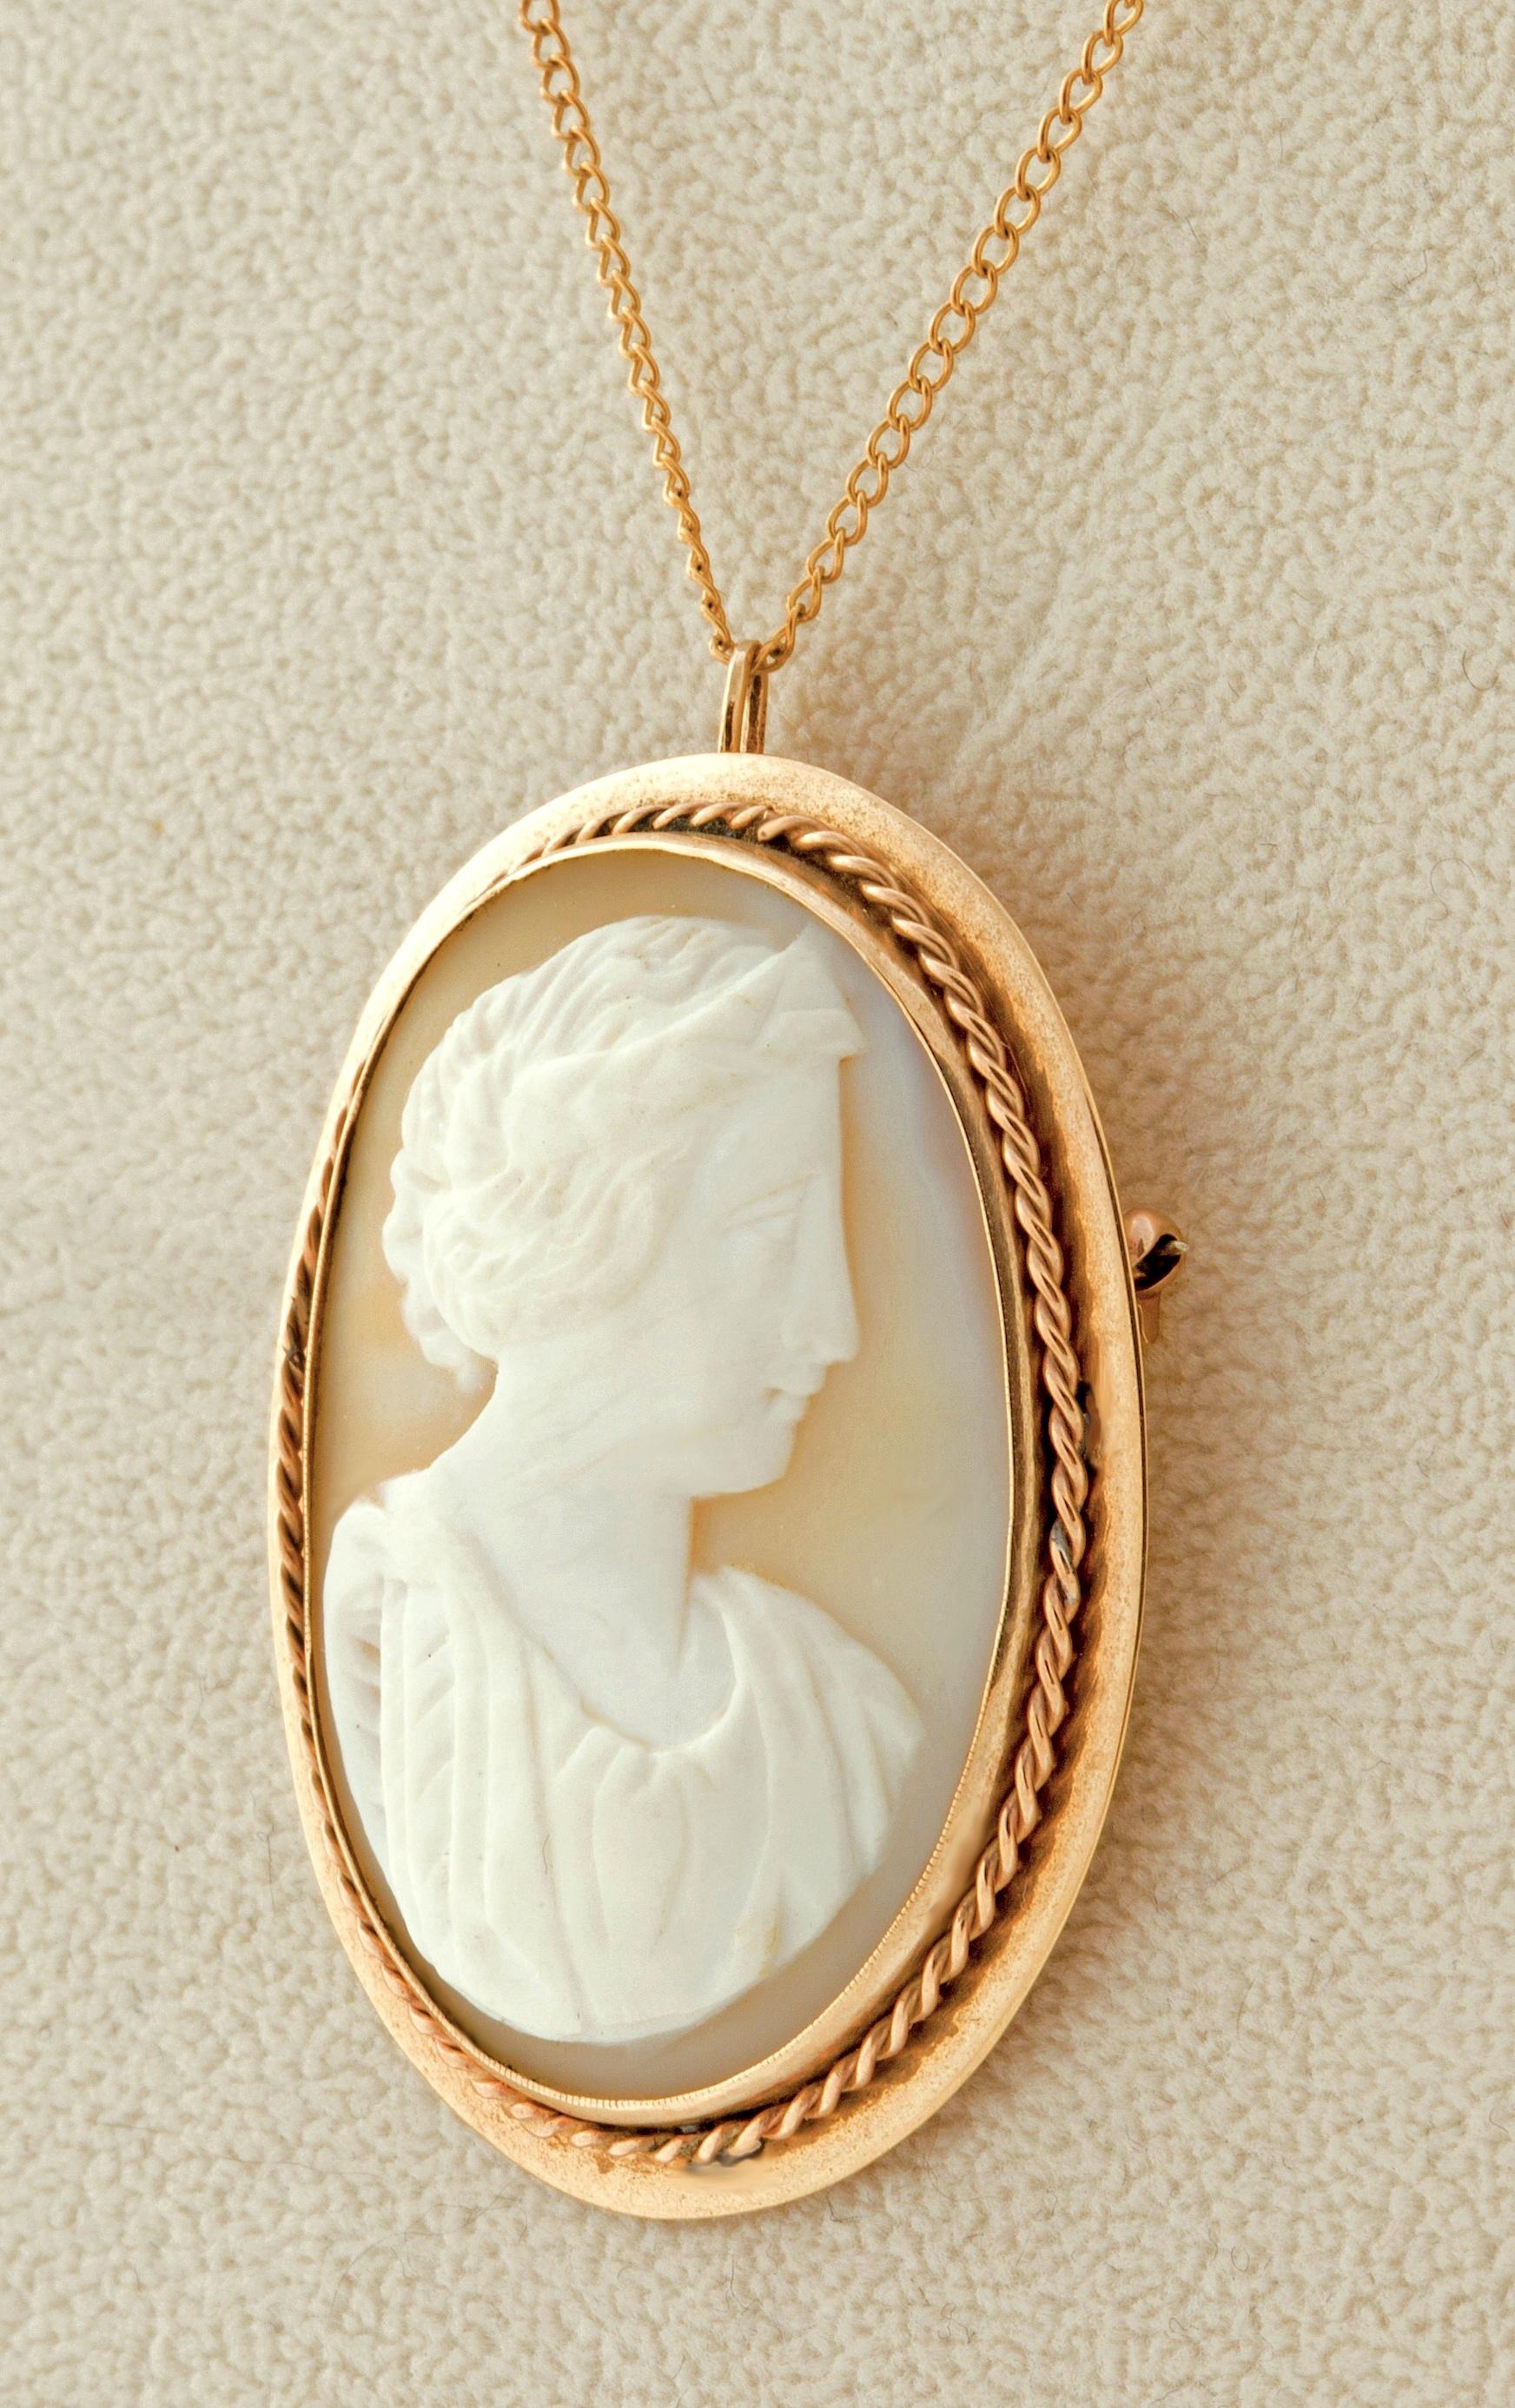 Women's Victorian Gold Cameo Pendant & Brooch of a Goddess For Sale